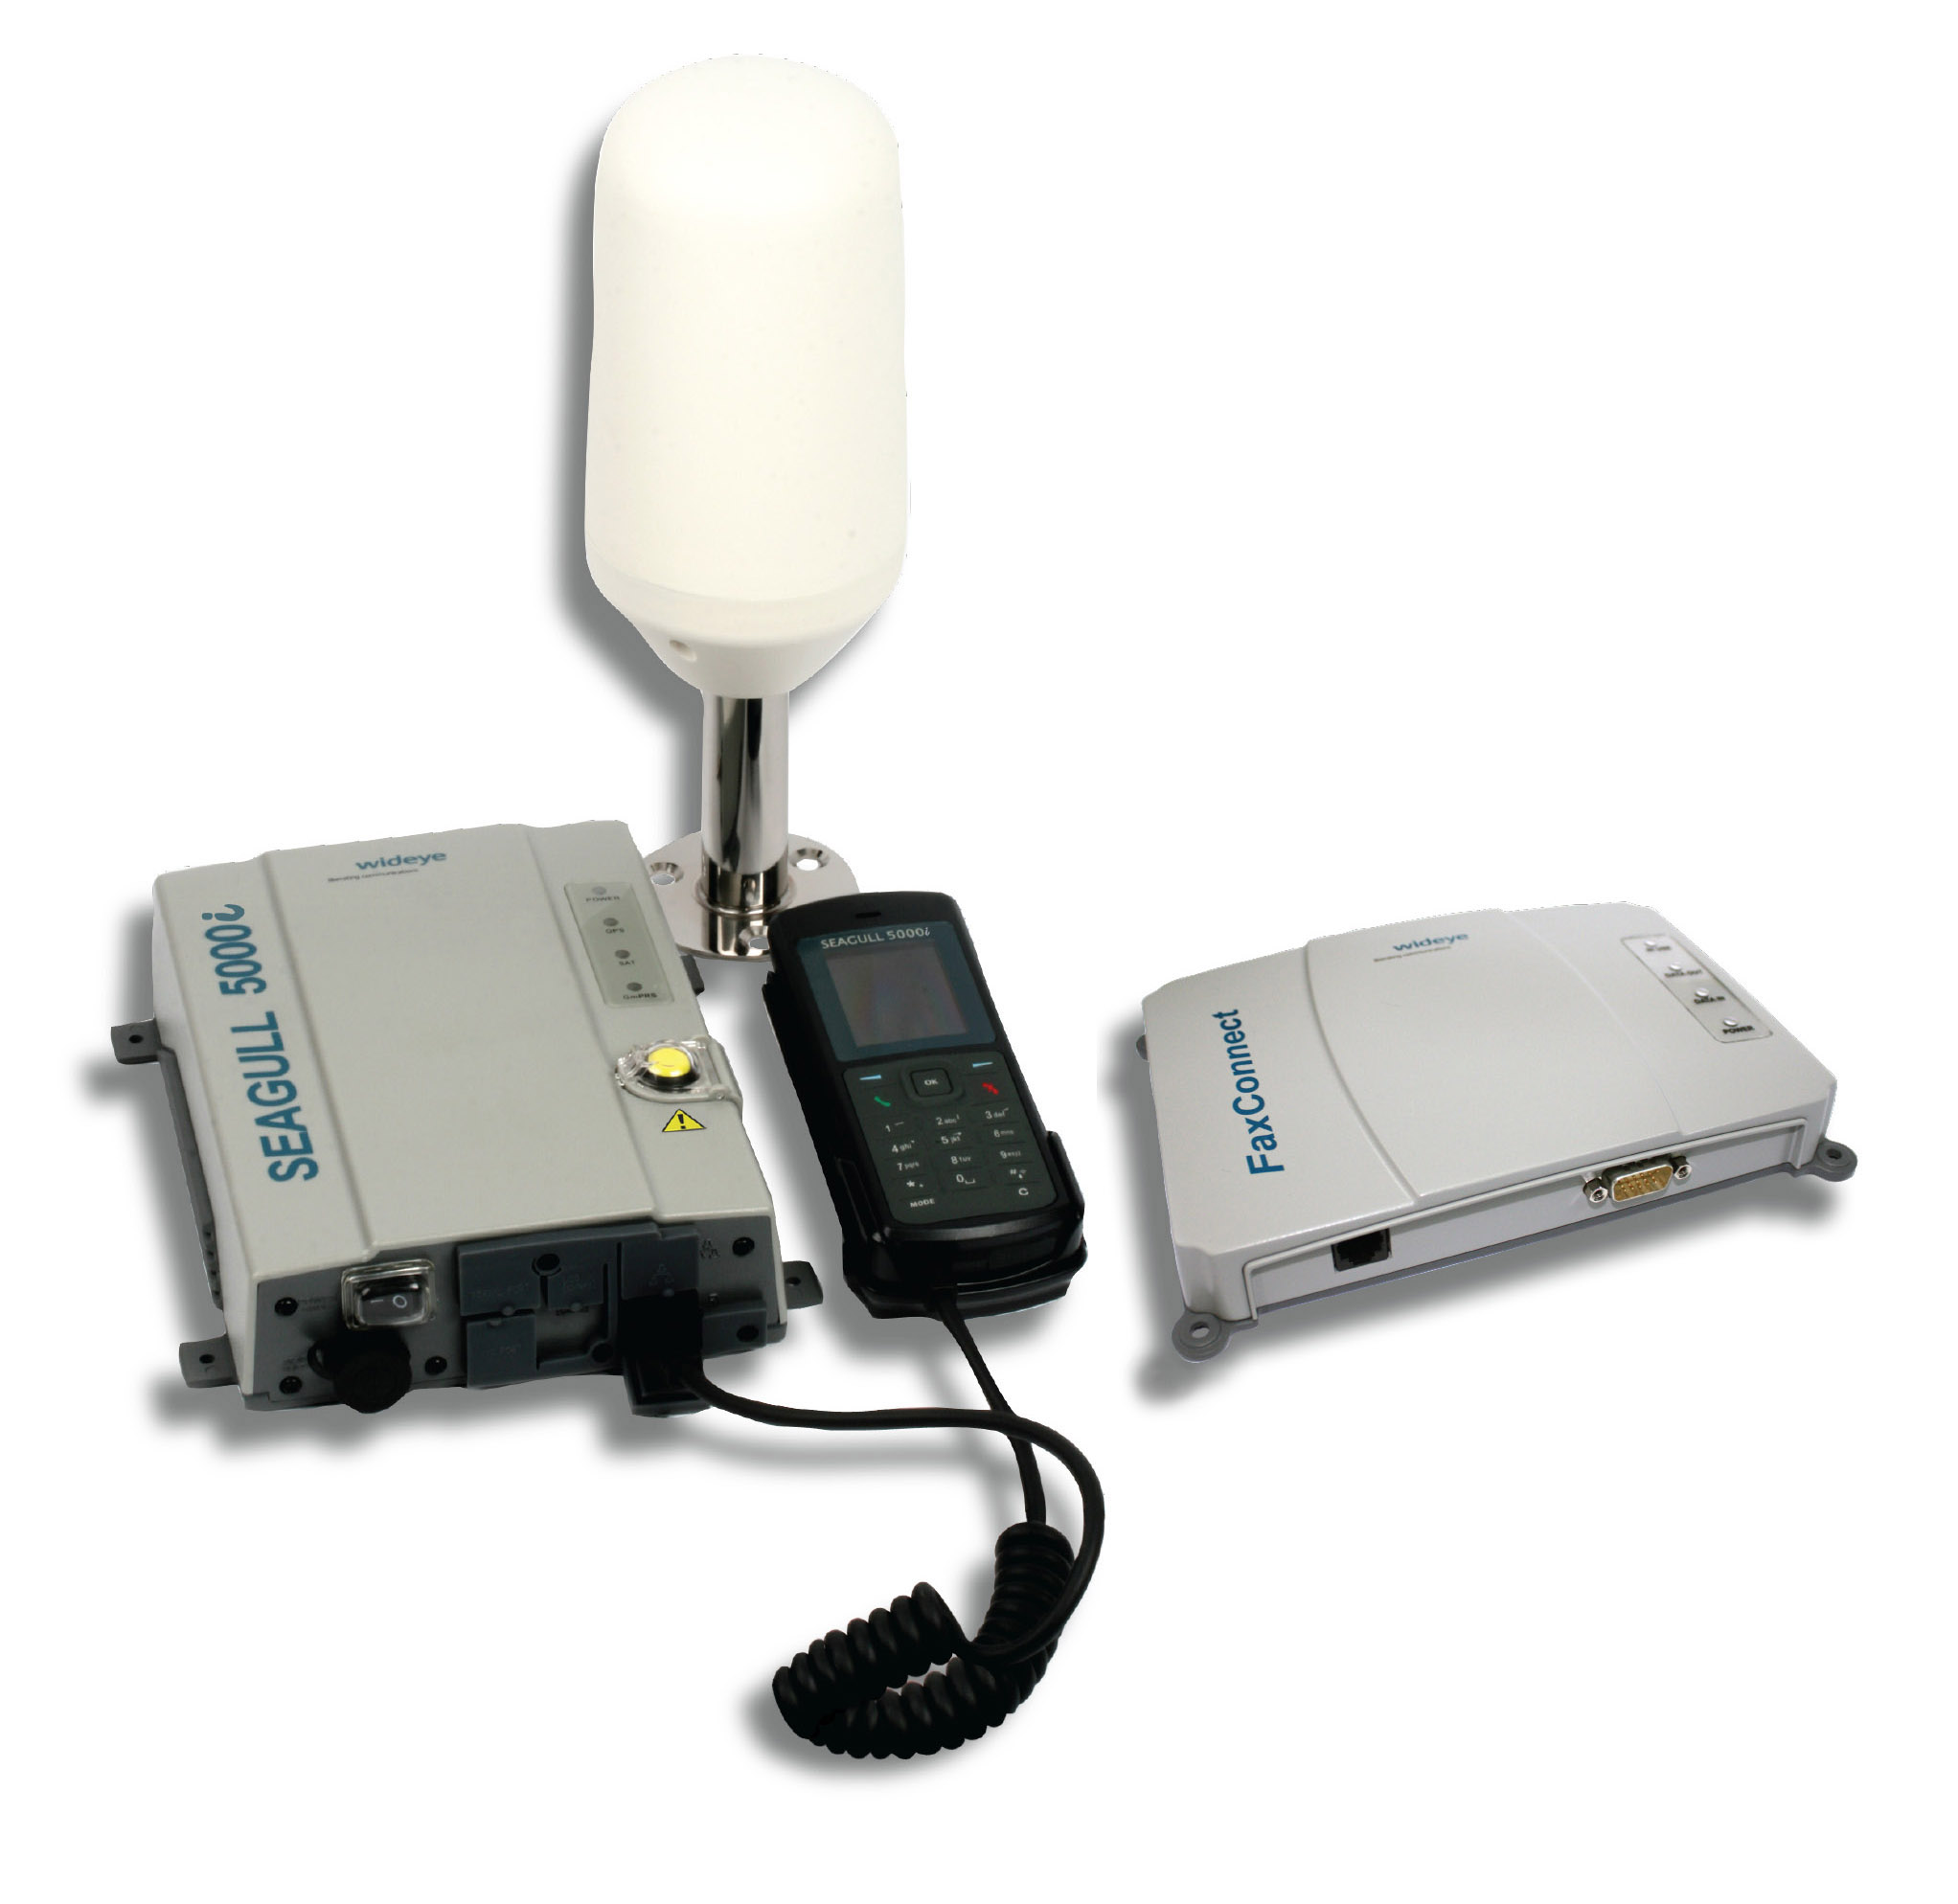 Wideye Seagull 5000i Satellite Terminal, Active Antenna, 10m Cable and Fax Connect